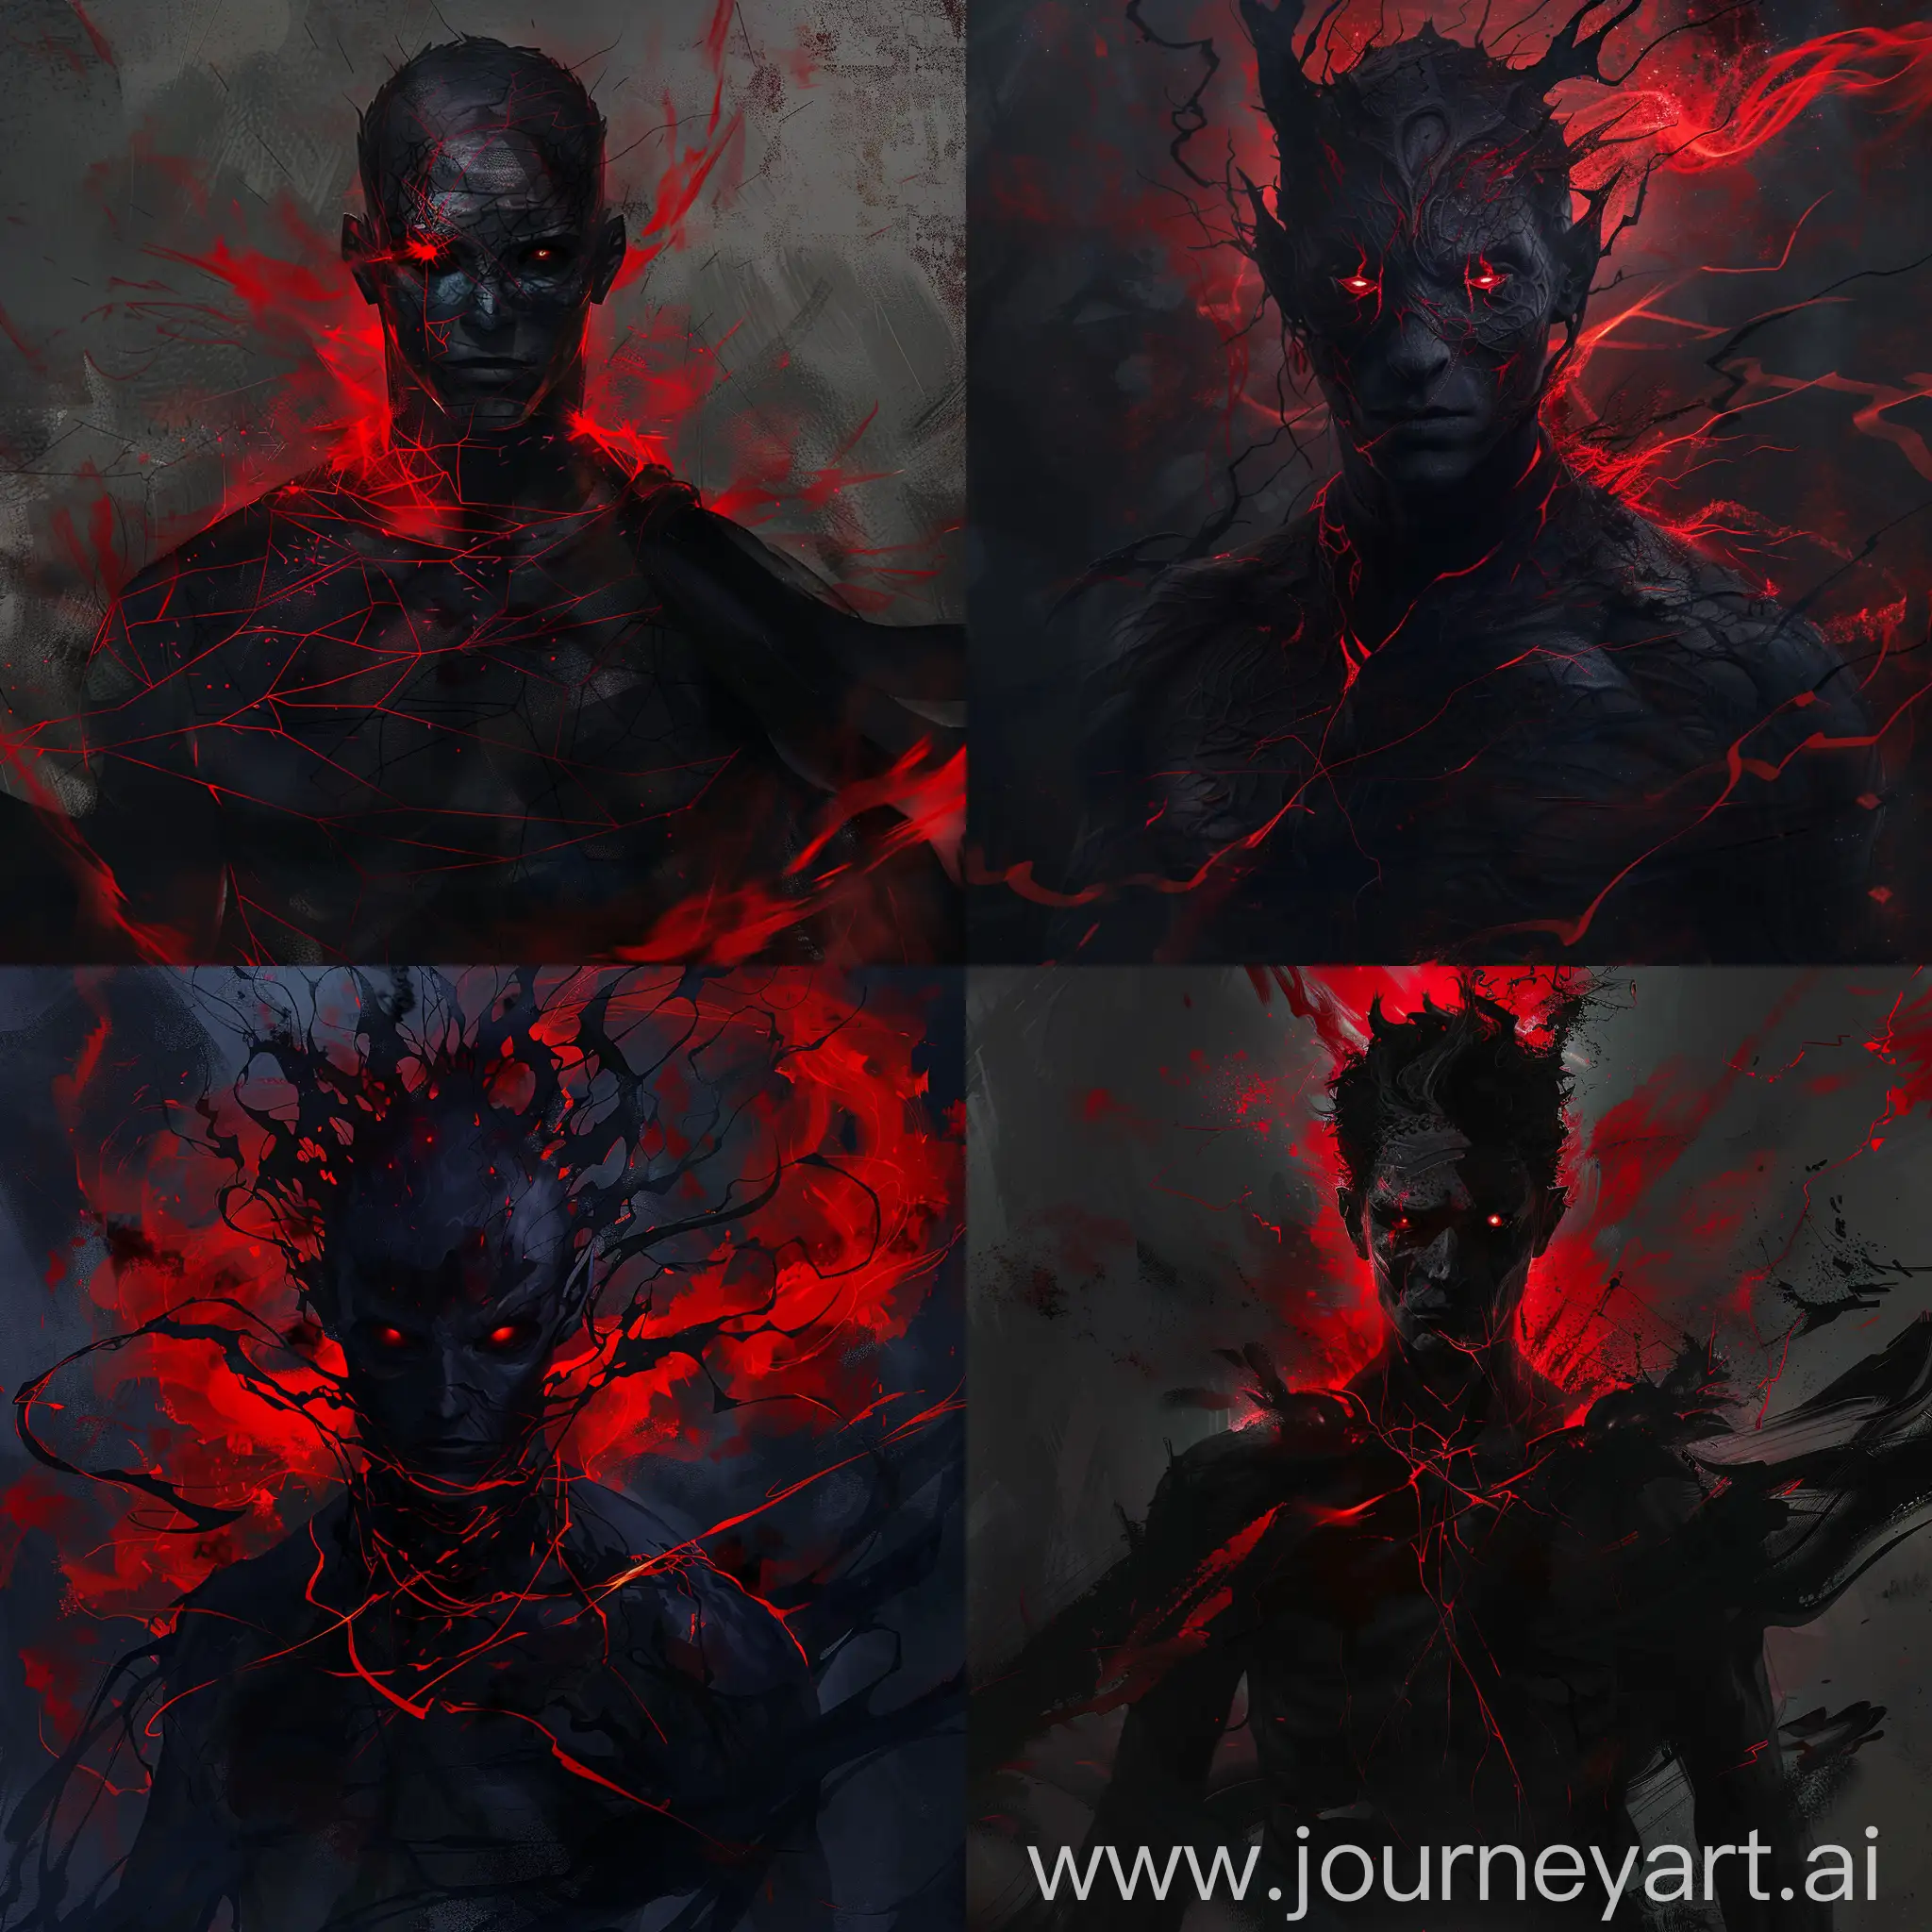 Sentinel of Suffering, embodying darkness and shadows with red accents. A powerful, masculine figure transcending godly presence, featuring dark skin, shadowy form, intense red eyes, and a unique face with connected lines instead of a mouth. Cloaked in darkness, he conveys more of a suffering demeanor than fright, carrying the burdens of all creatures. A being bound to endless suffering. A powerful red aura.